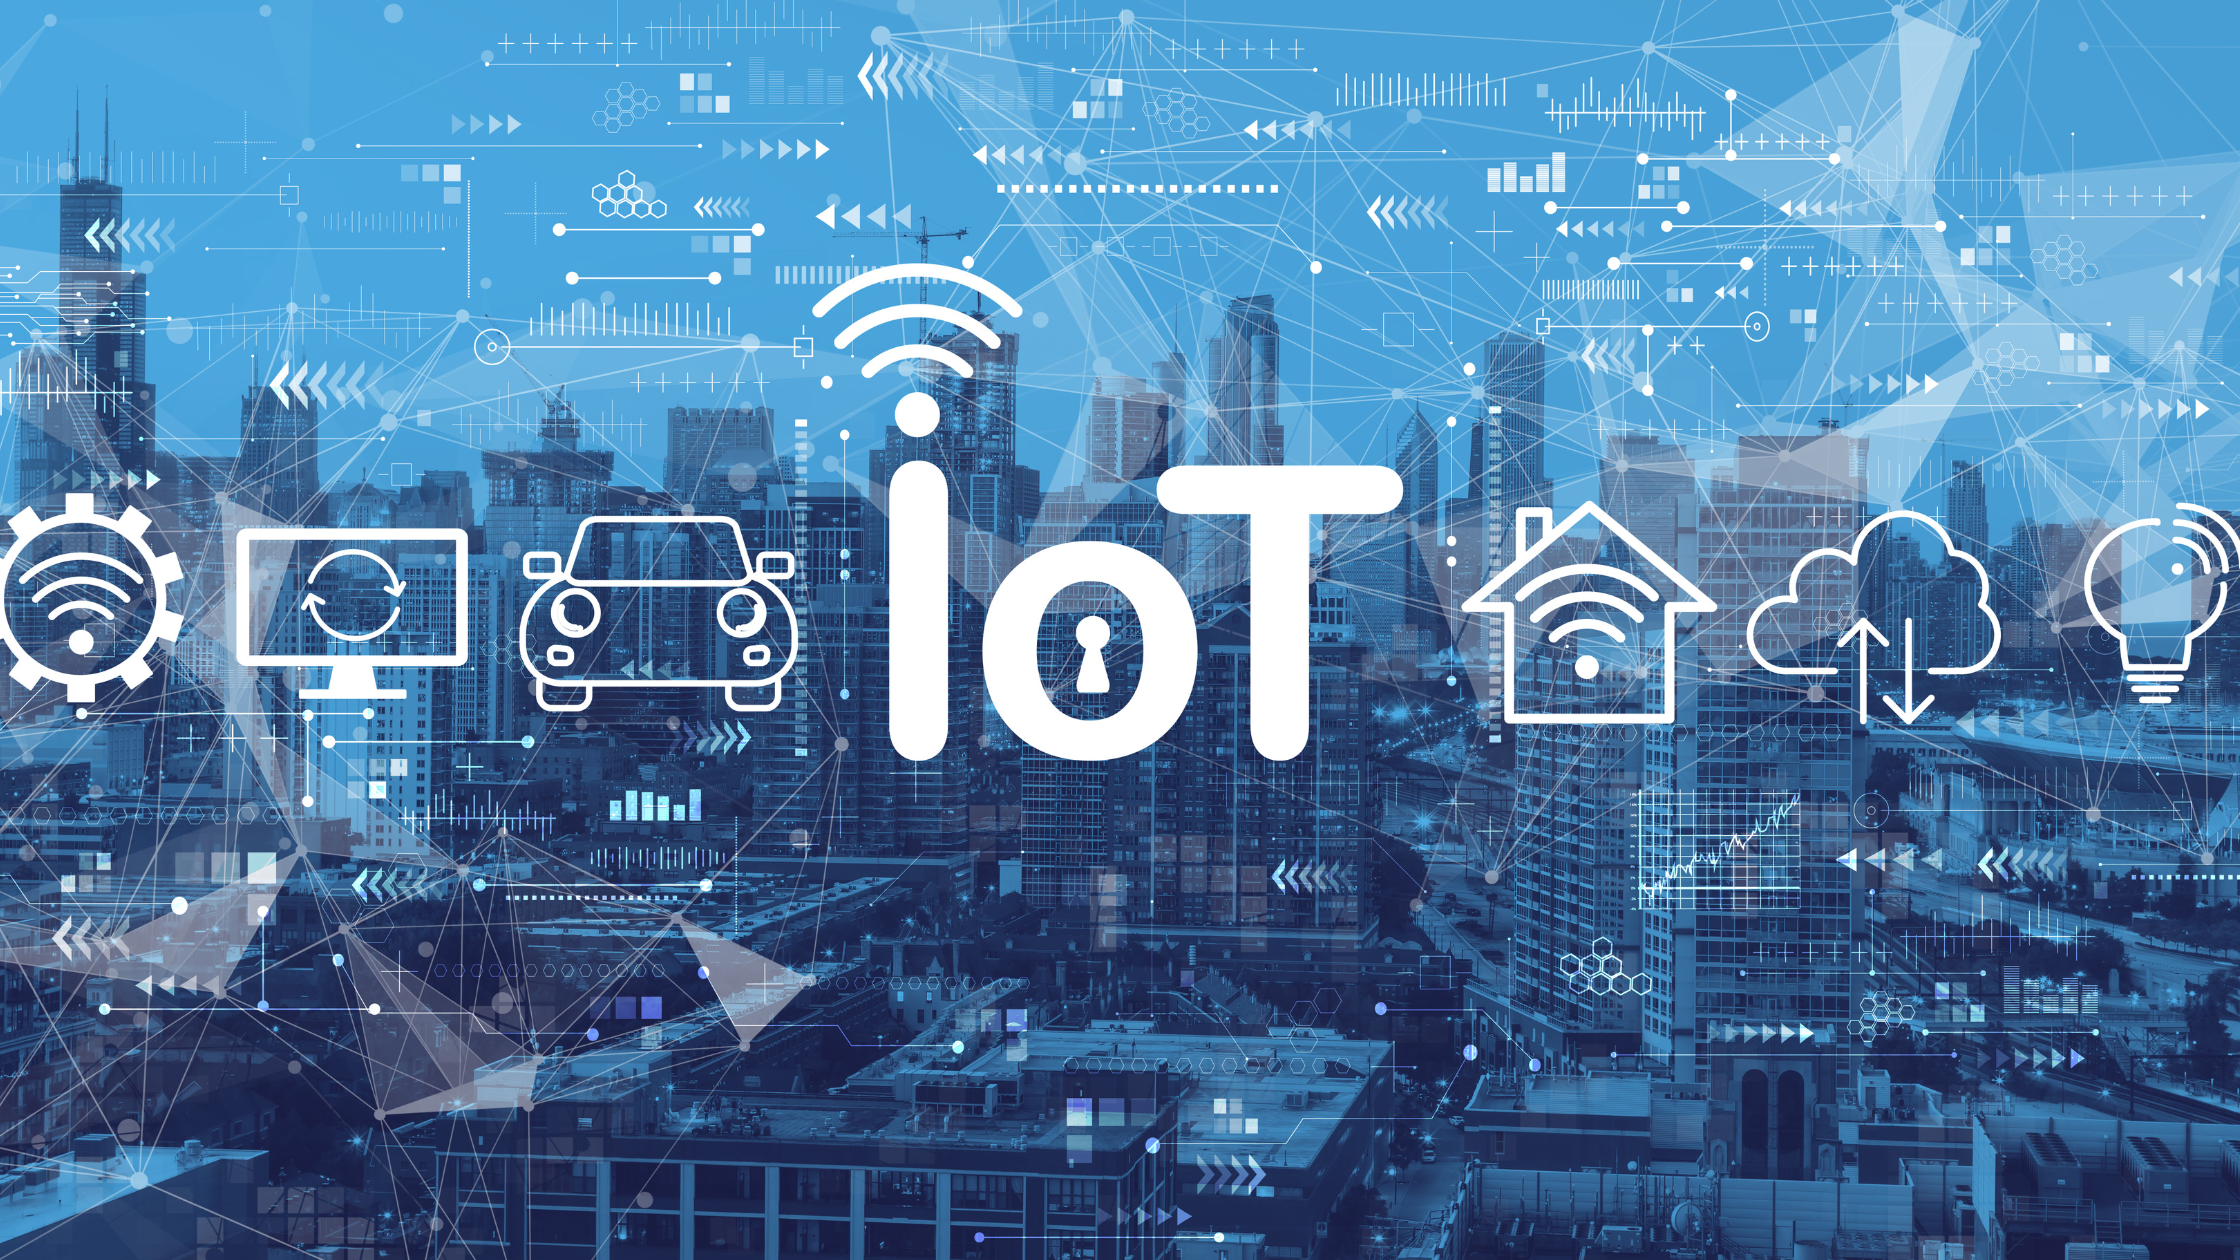 With the introduction of Industry 4.0, connected devices, home automation systems and wearable health gears, the demand for IoT-based applications is increasing